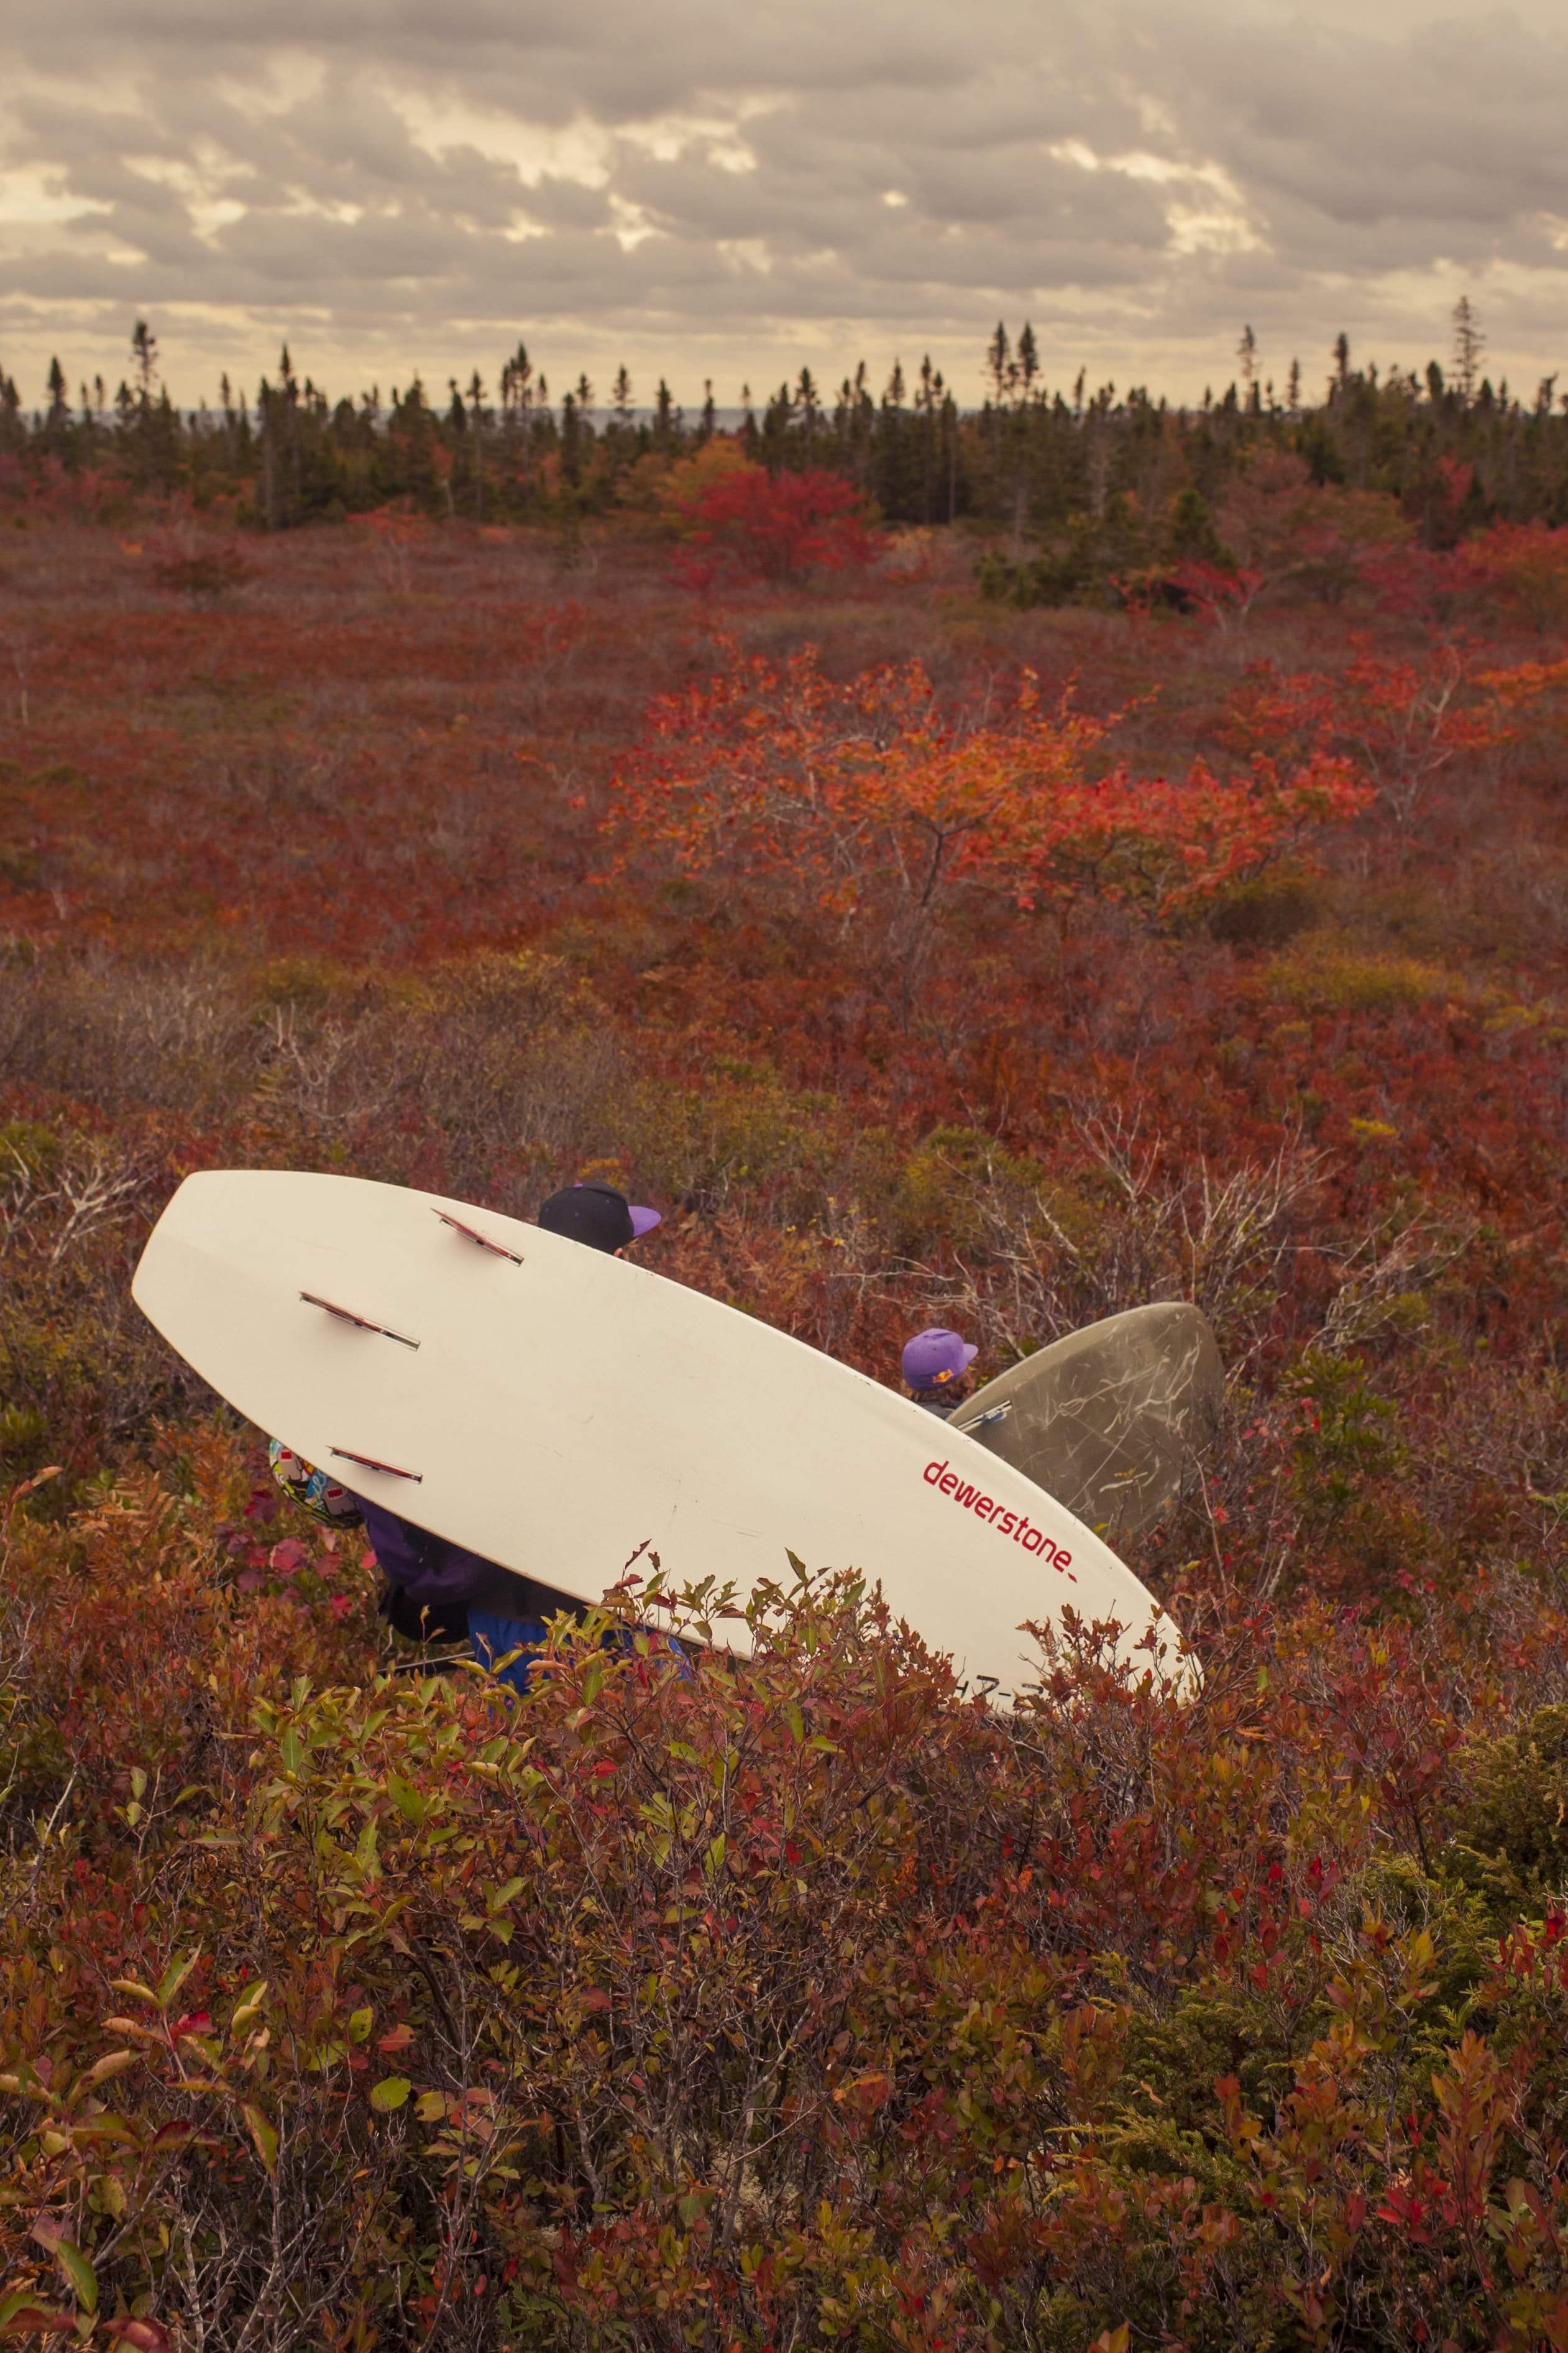 The lost waves of the North - Surf kayaking in Nova Scotia. Part 2 - dewerstone